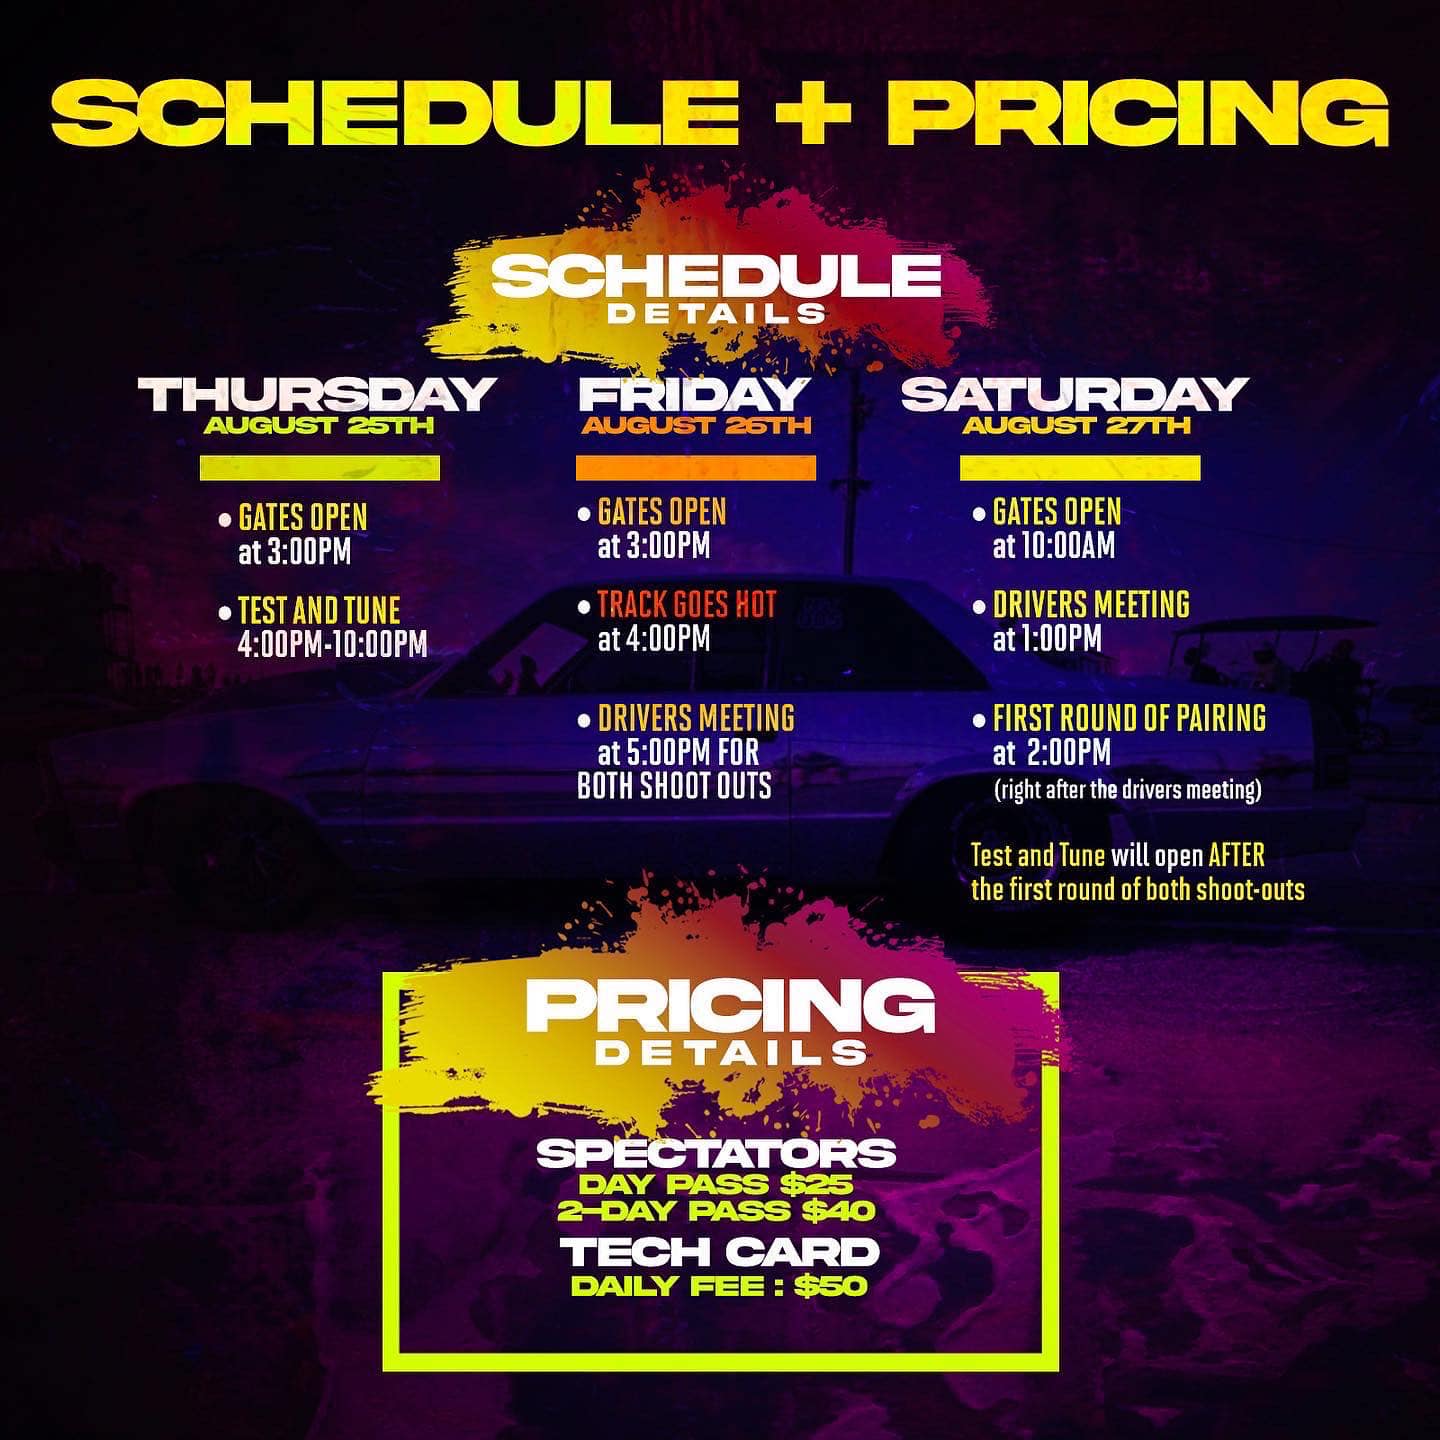 Event Times and Pricing